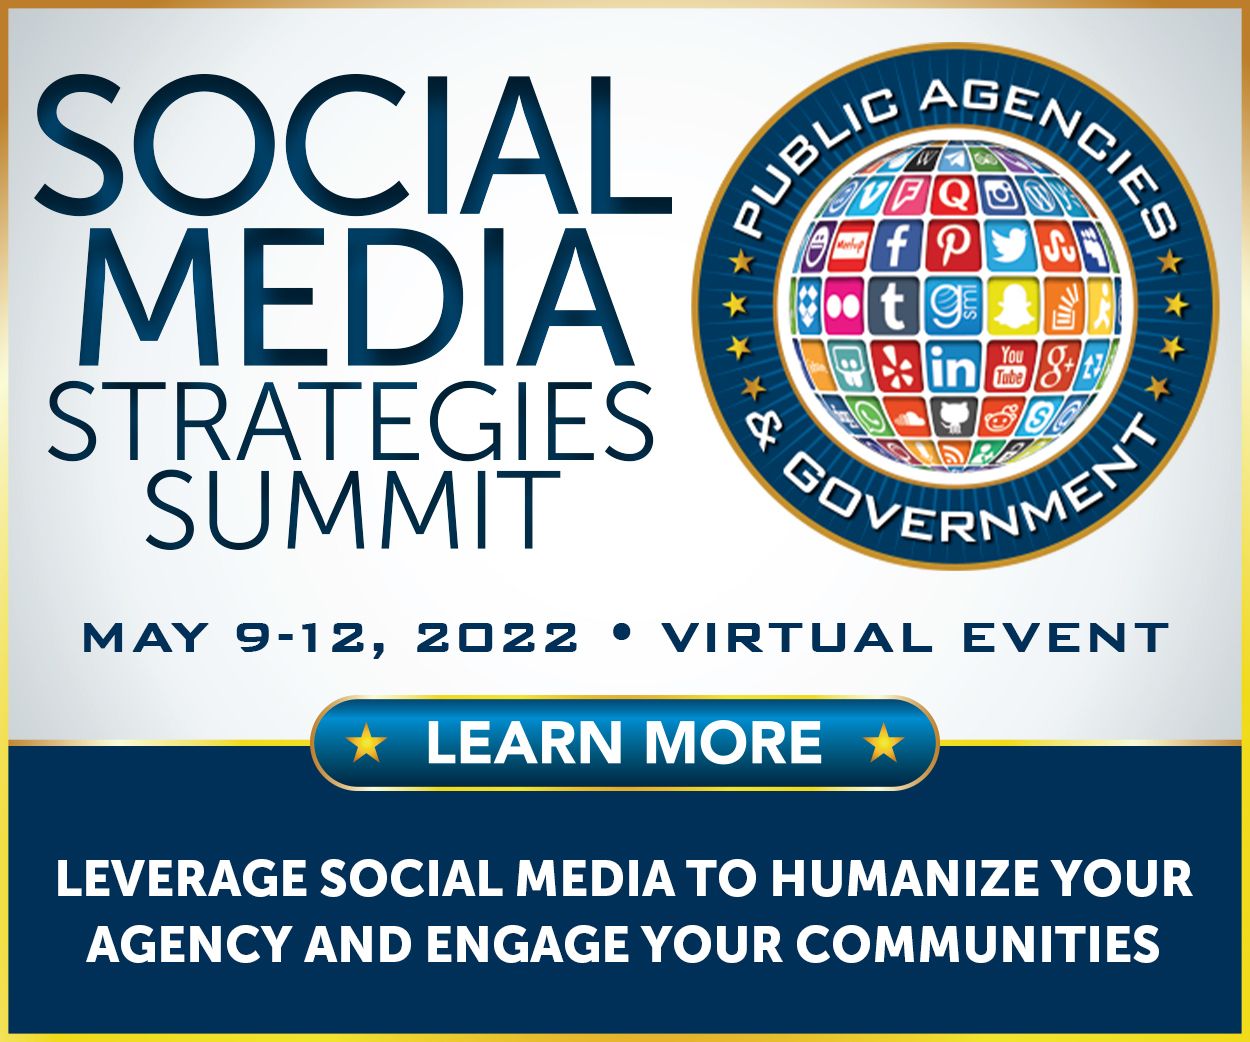 Social Media Strategies Summit Public Agencies and Government, Online Event